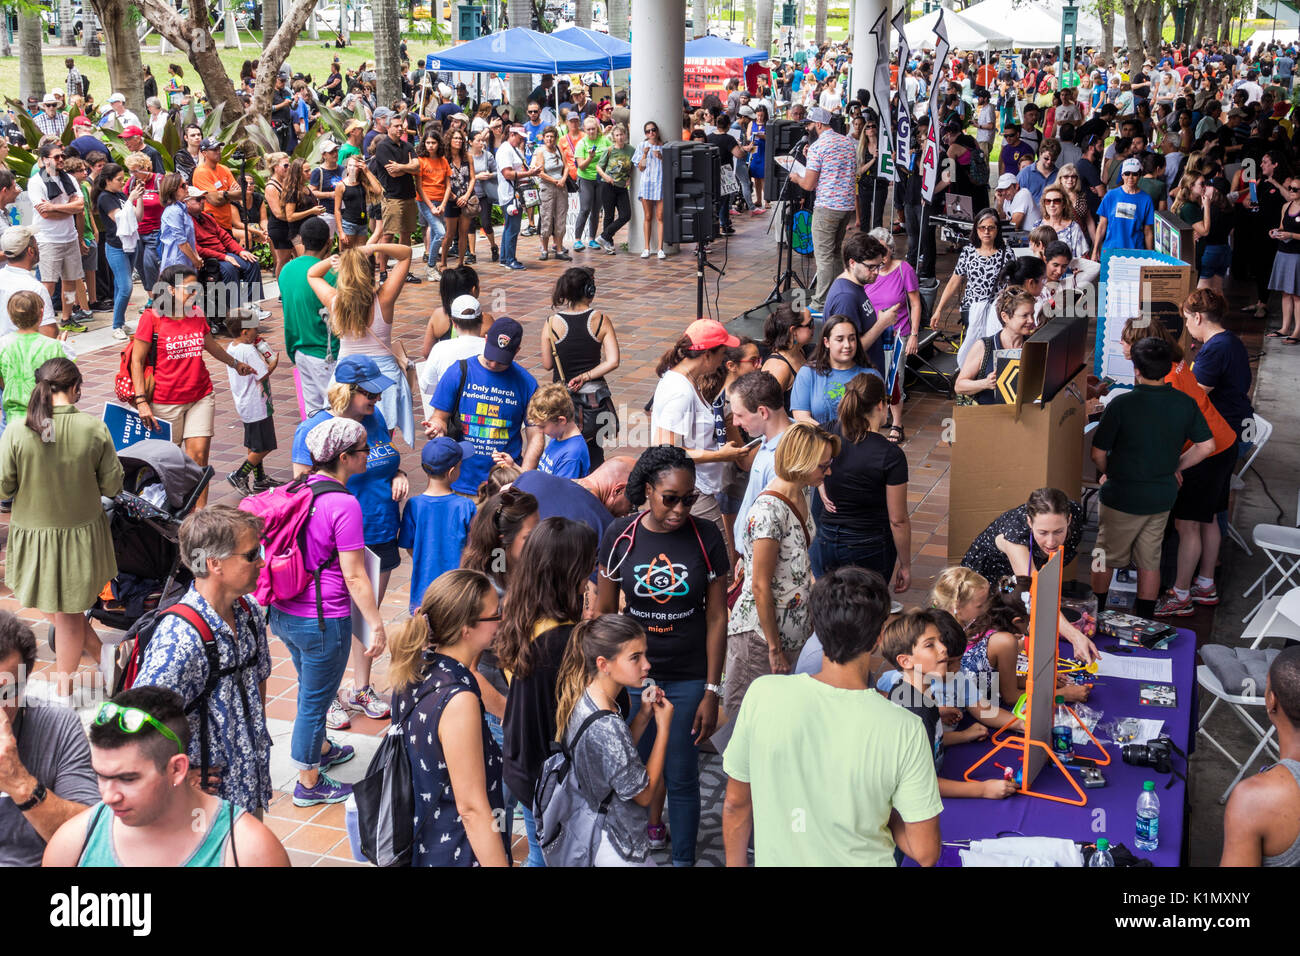 Miami Florida, Downtown, Government Center, March for Science, Protest, Rallye, Science expo, Crowd, FL170430175 Stockfoto